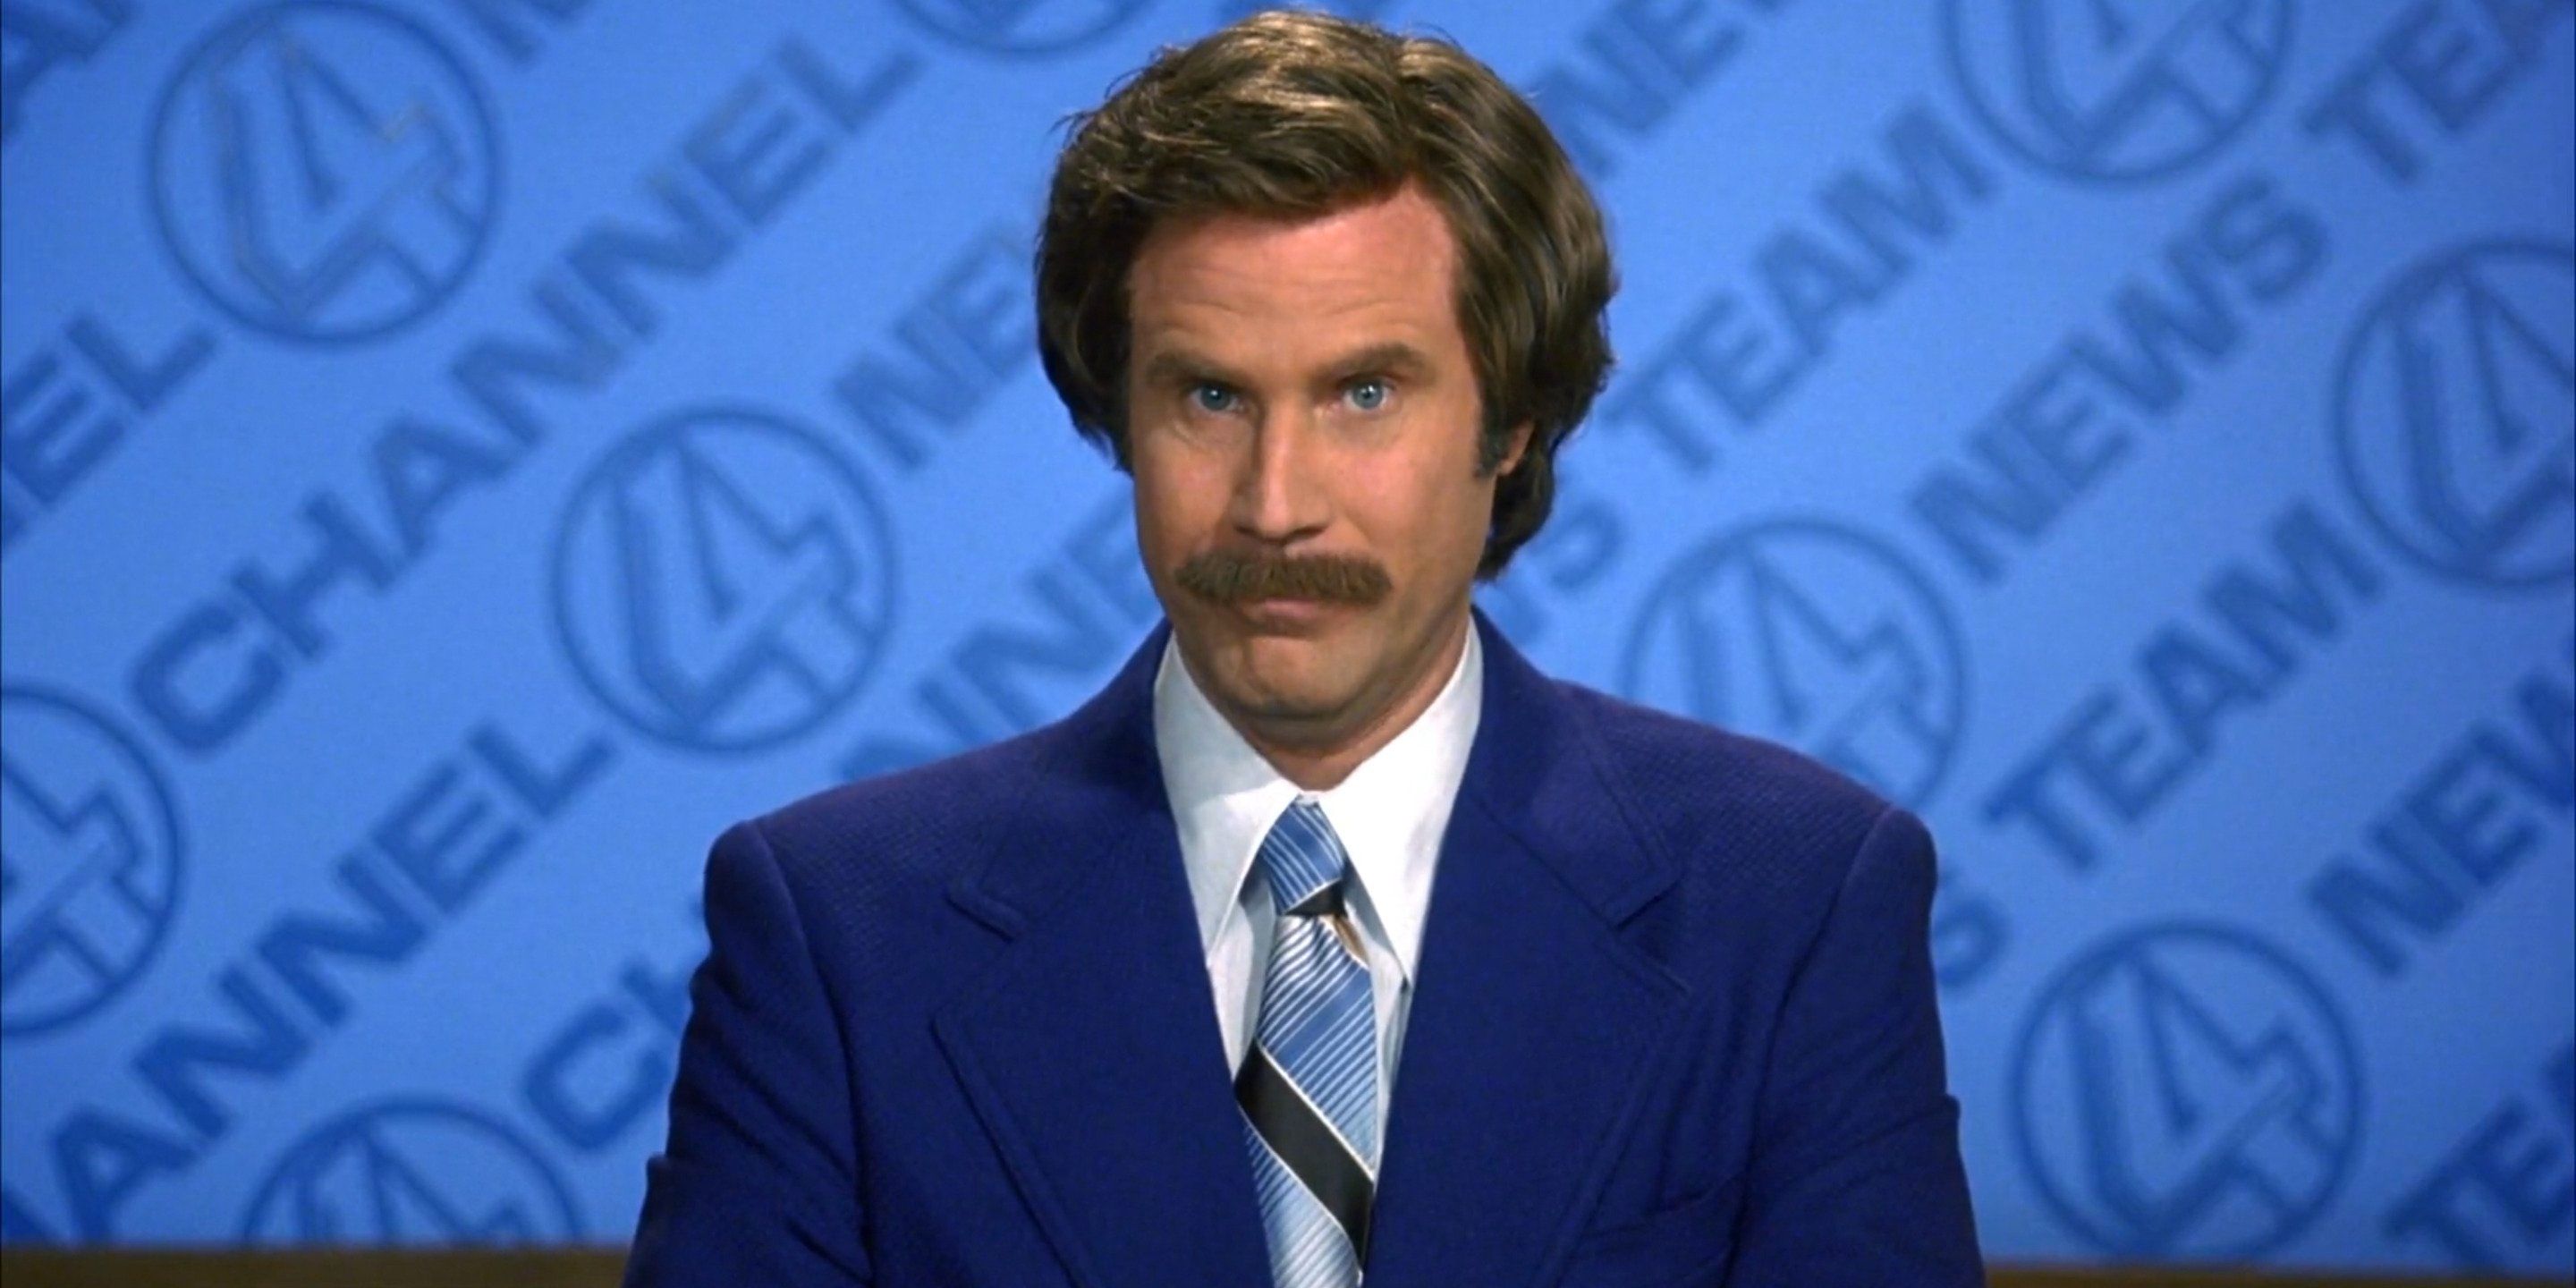 A still from Anchorman featuring Will Ferrell as Ron Burgundy on air at Channel 4 News